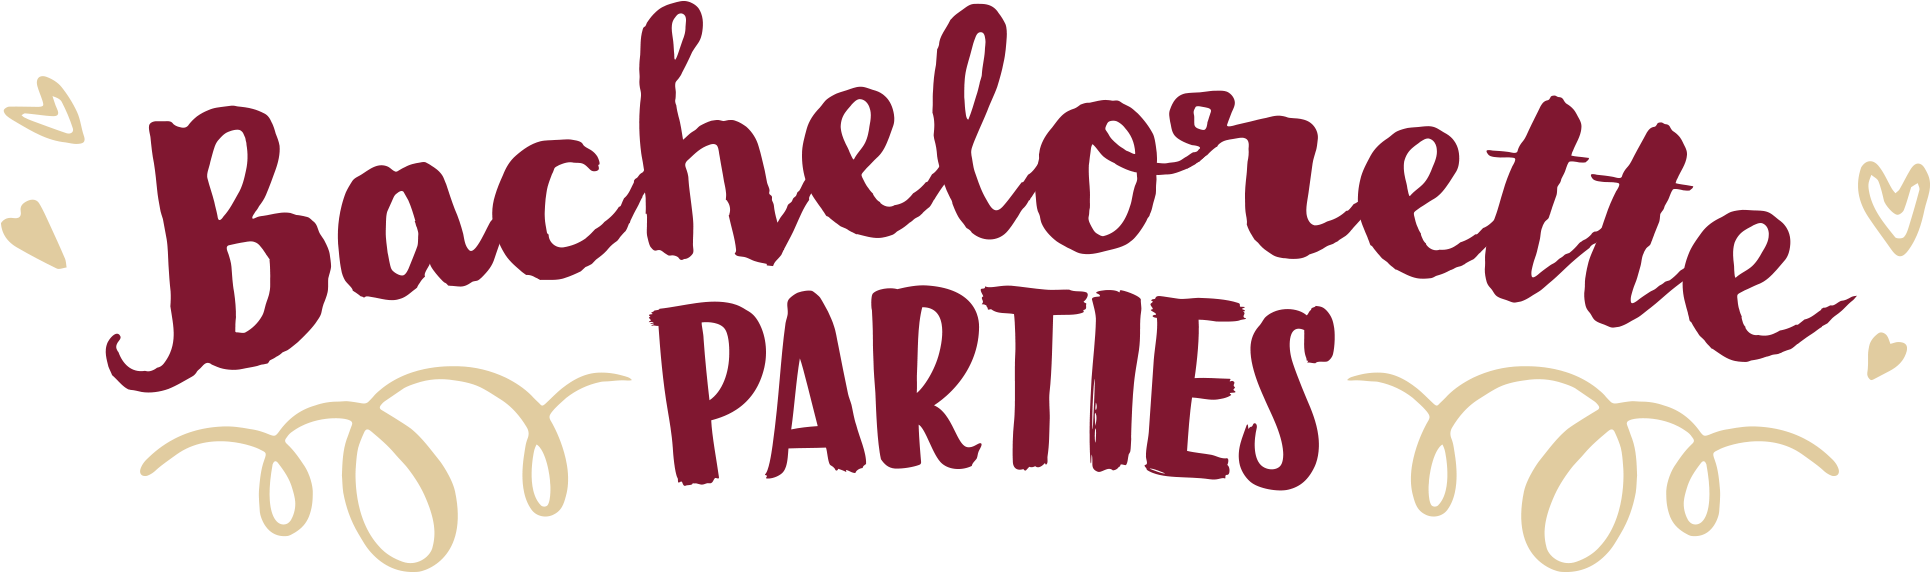 Bachelorette Parties Calligraphy PNG